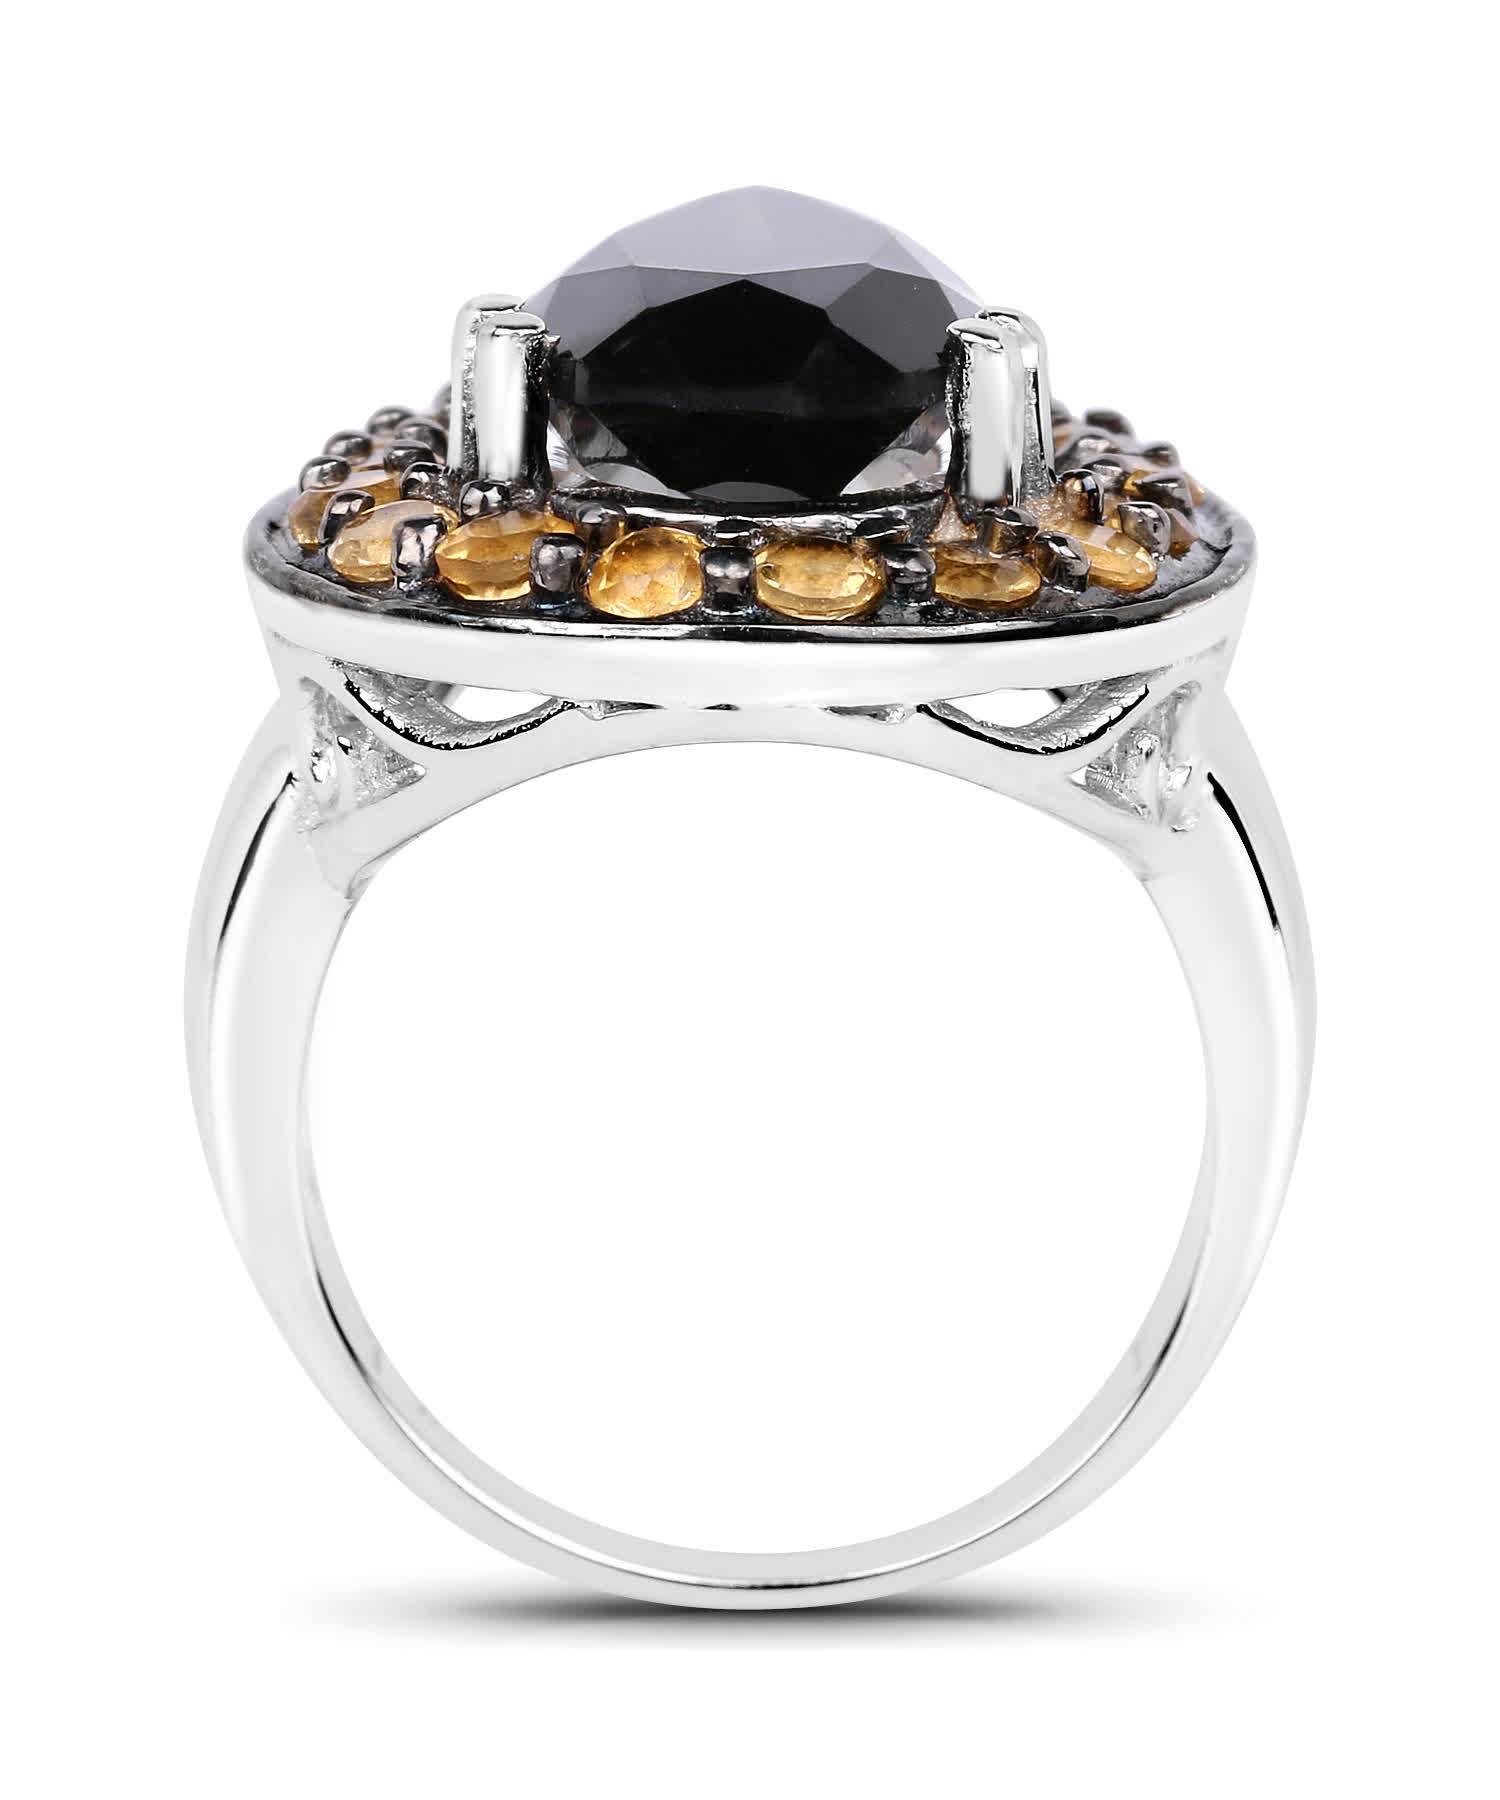 7.34ctw Natural Smoky Quartz and Citrine Rhodium Plated 925 Sterling Silver Cocktail Ring View 2